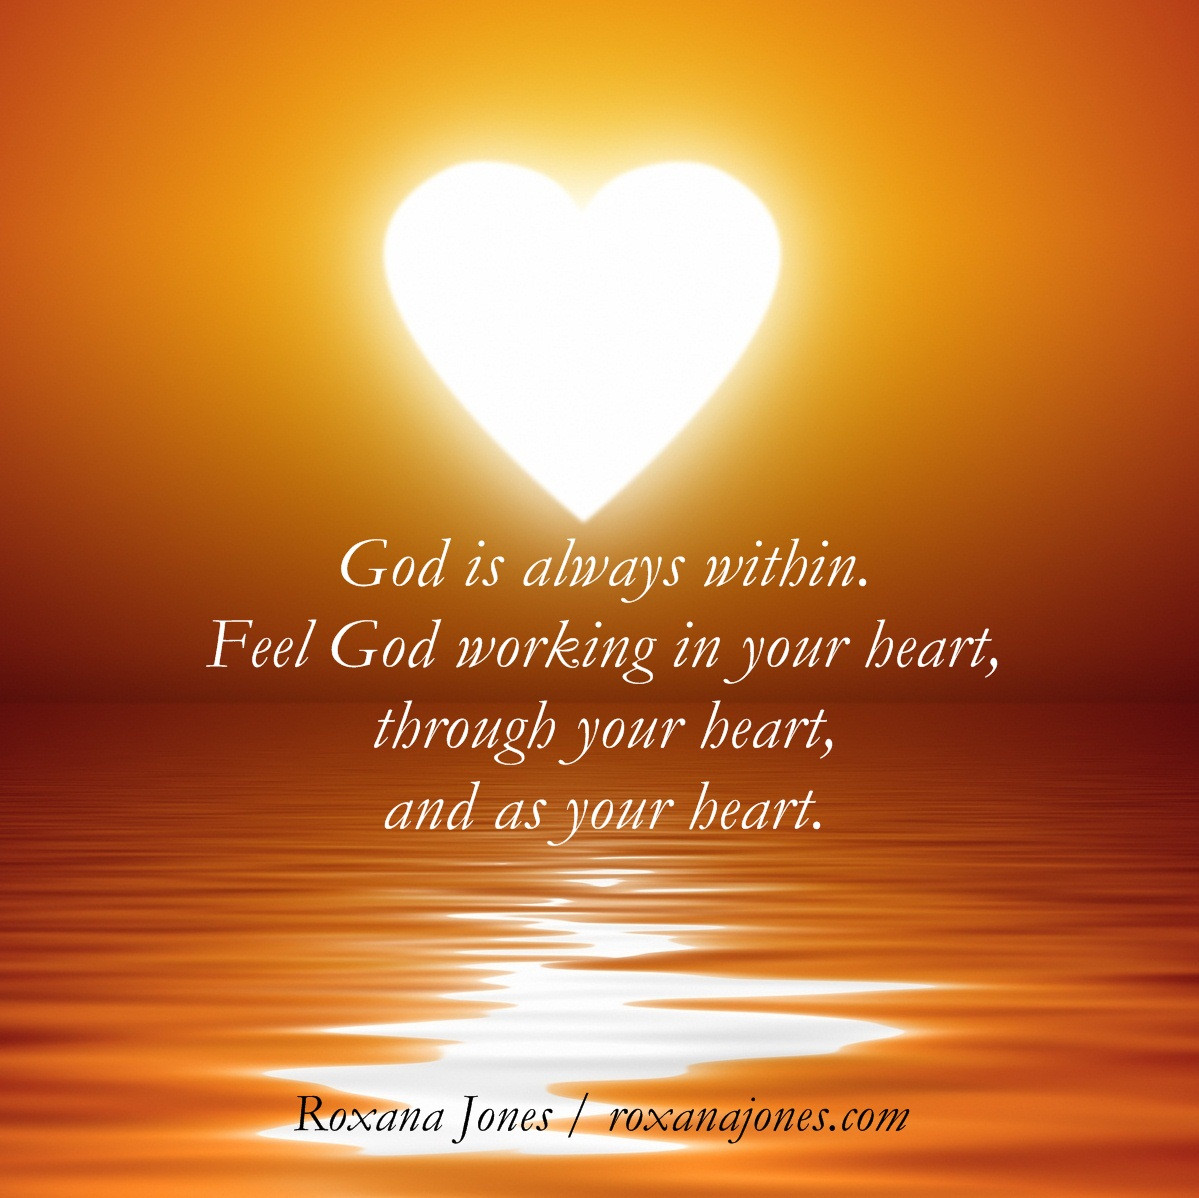 Inspirational Quotes About God
 God =Heart Inspirational